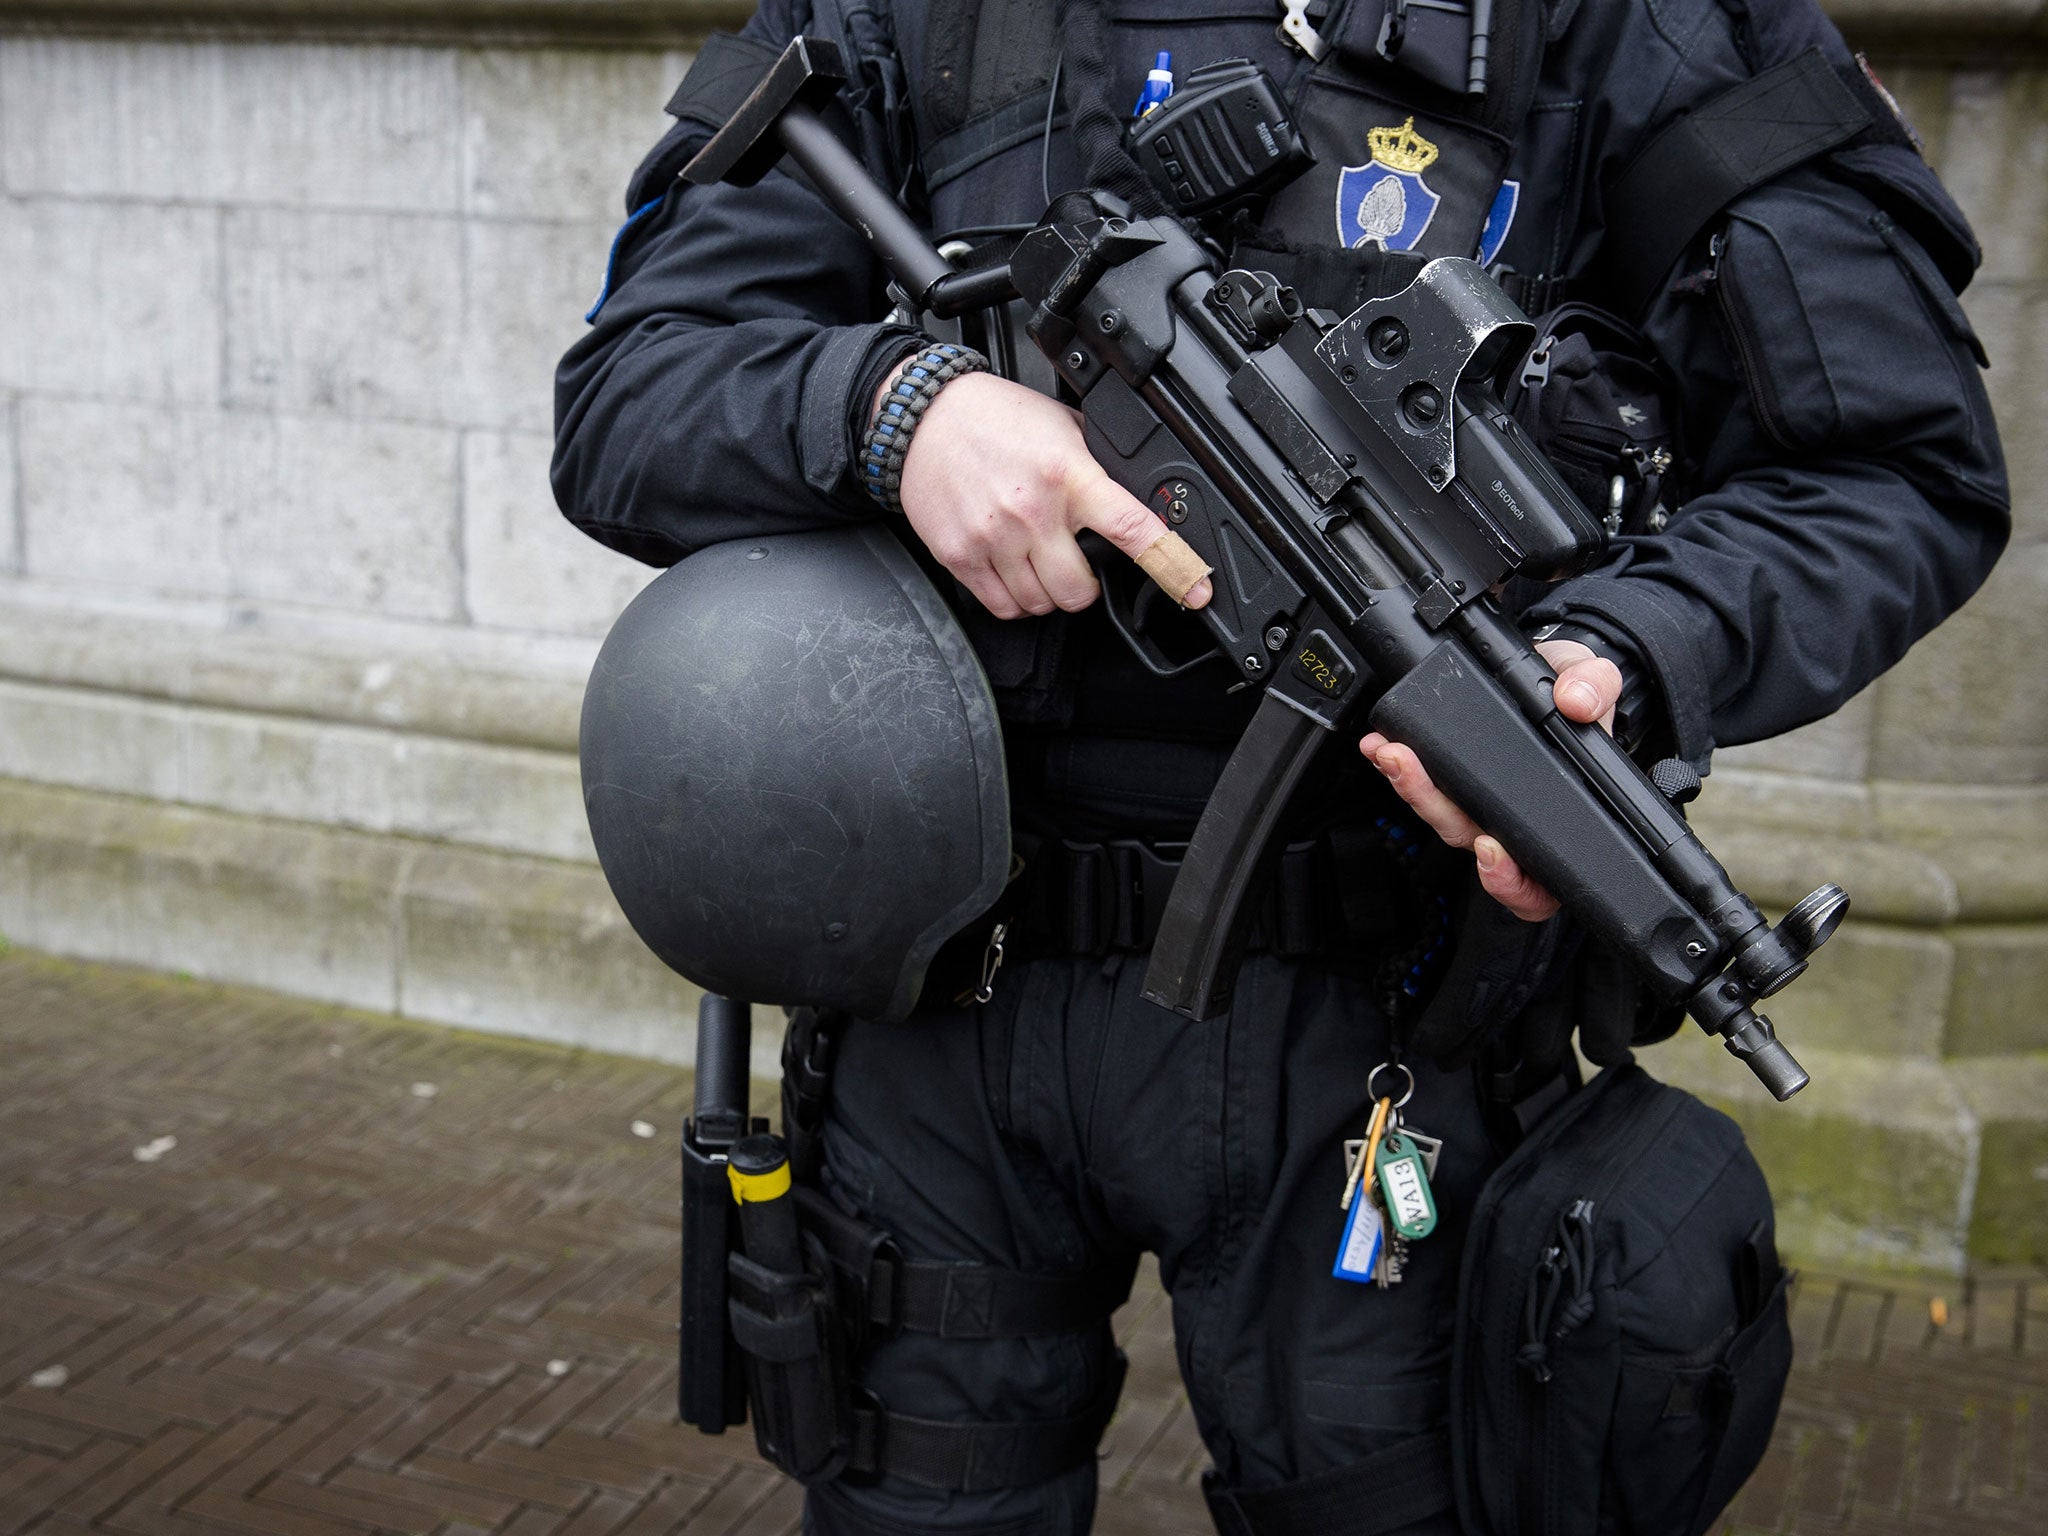 Security services in the Netherlands are on high alert for possible terror attacks